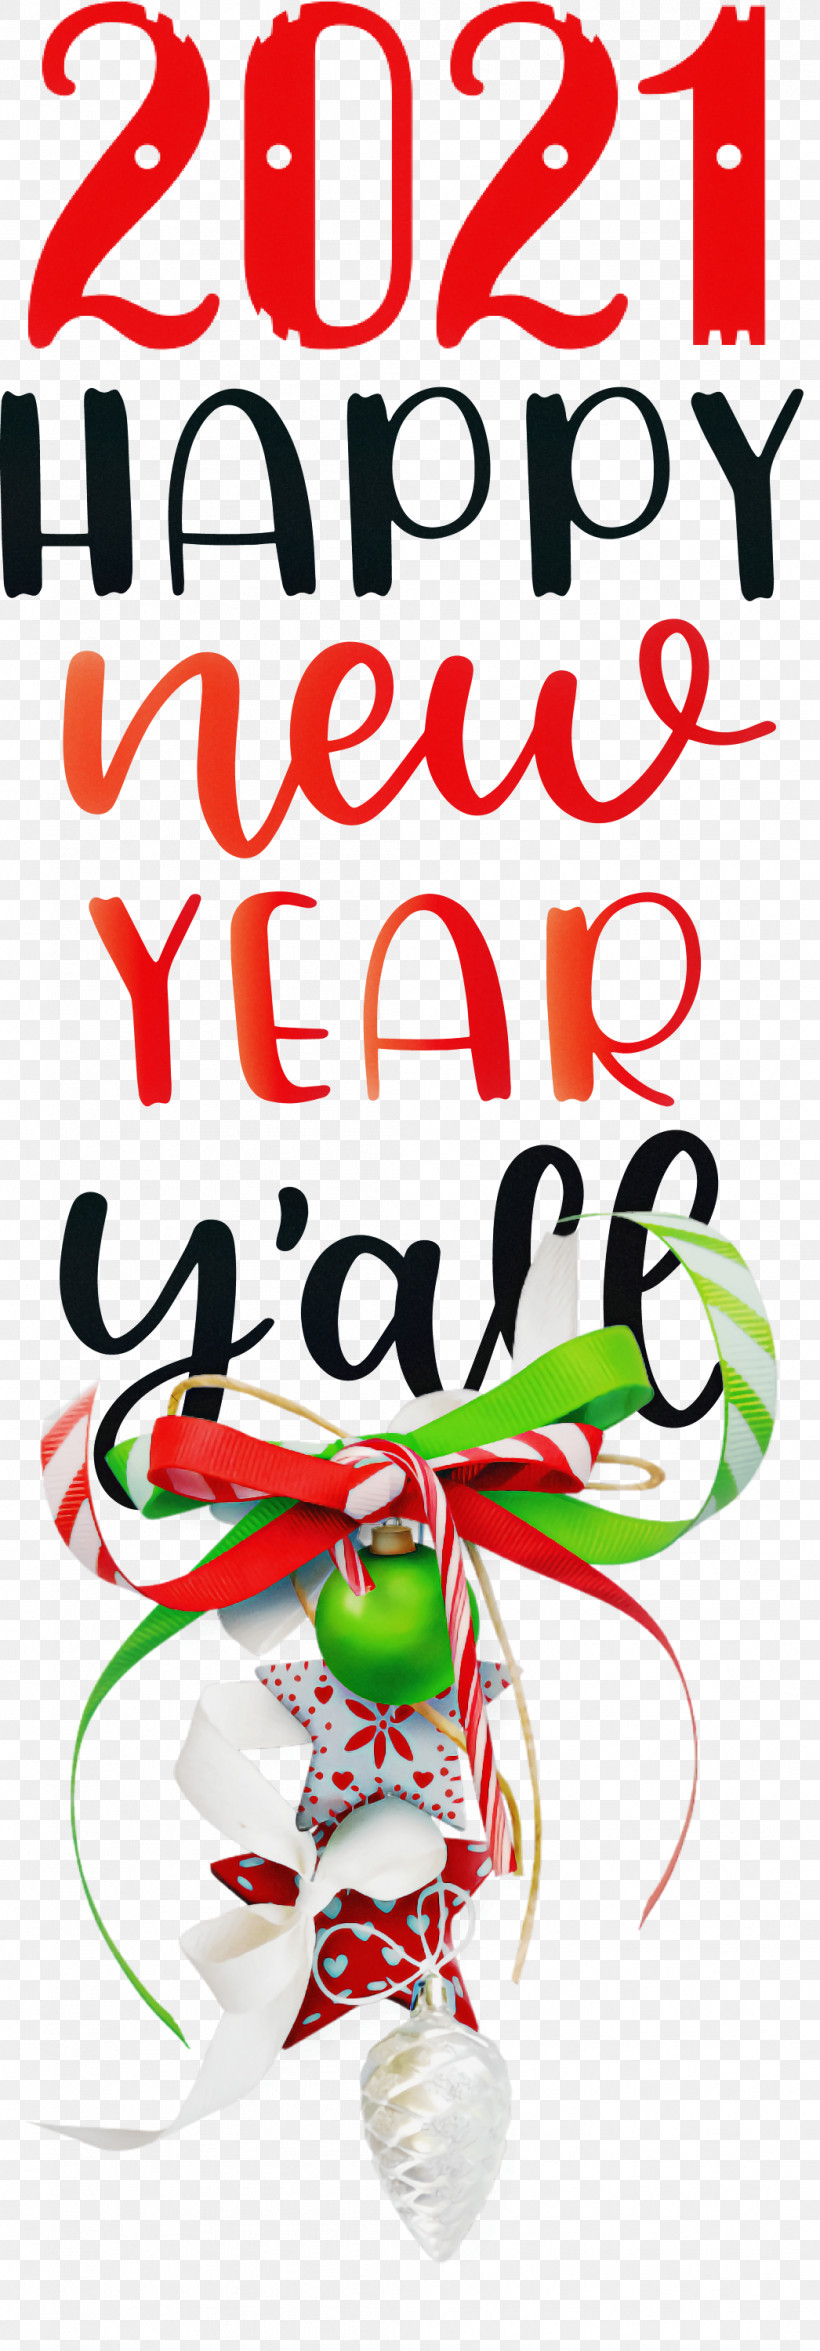 2021 Happy New Year 2021 New Year 2021 Wishes, PNG, 1046x2999px, 2021 Happy New Year, 2021 New Year, 2021 Wishes, Behavior, Geometry Download Free